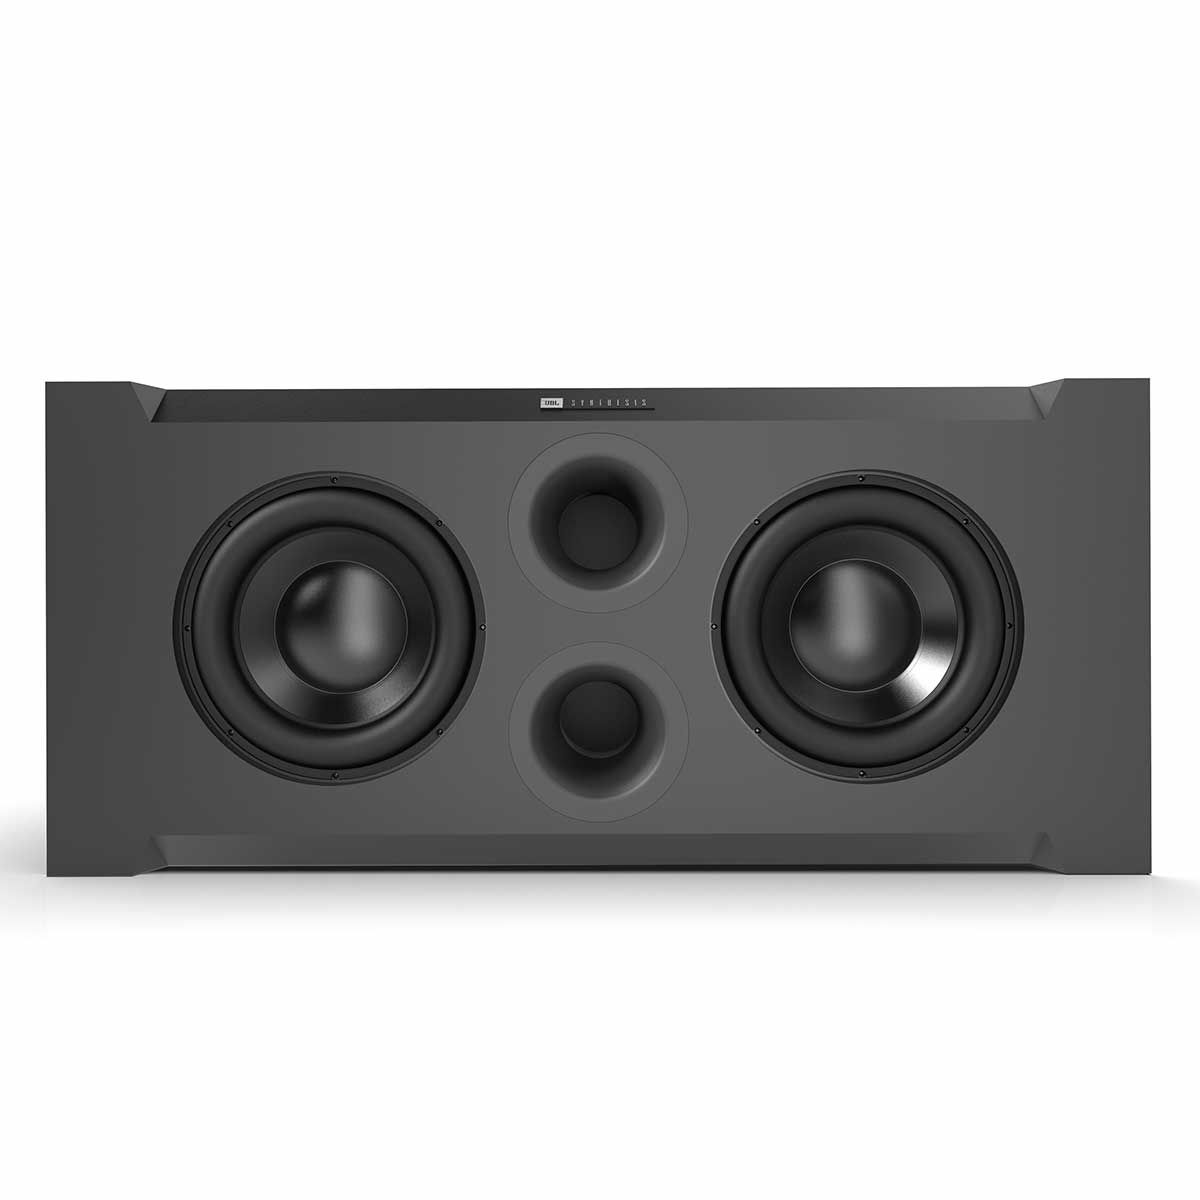 JBL Synthesis SSW-1 Dual Subwoofer, Black, front horizontal view